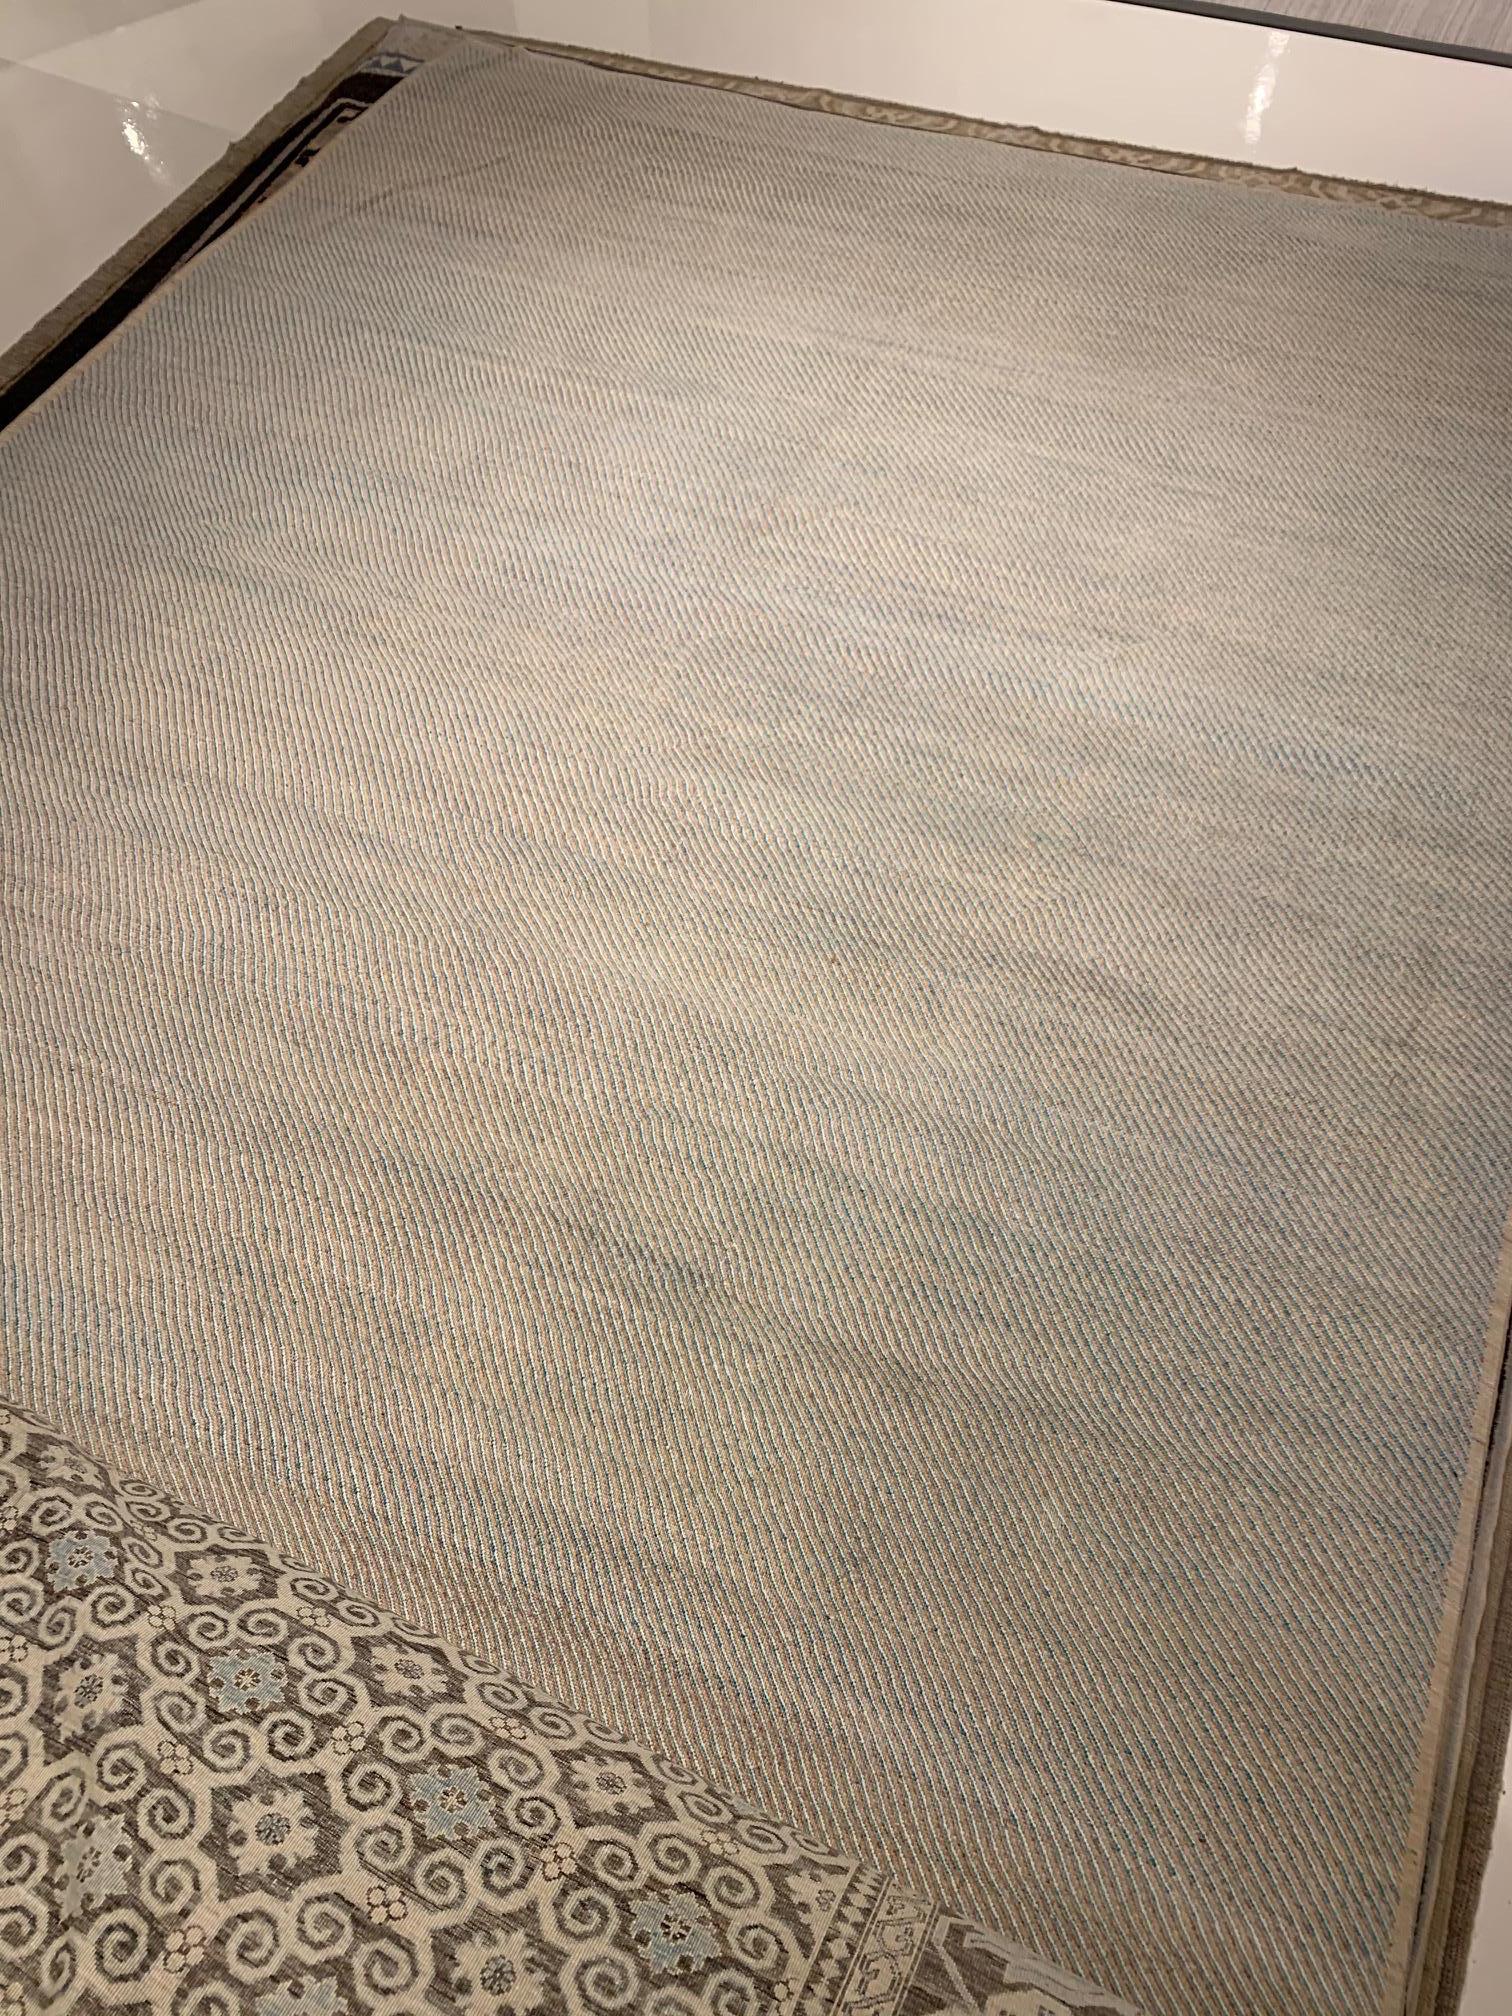 Contemporary handmade rug in beige and blue by Doris Leslie Blau.
Size: 8'9